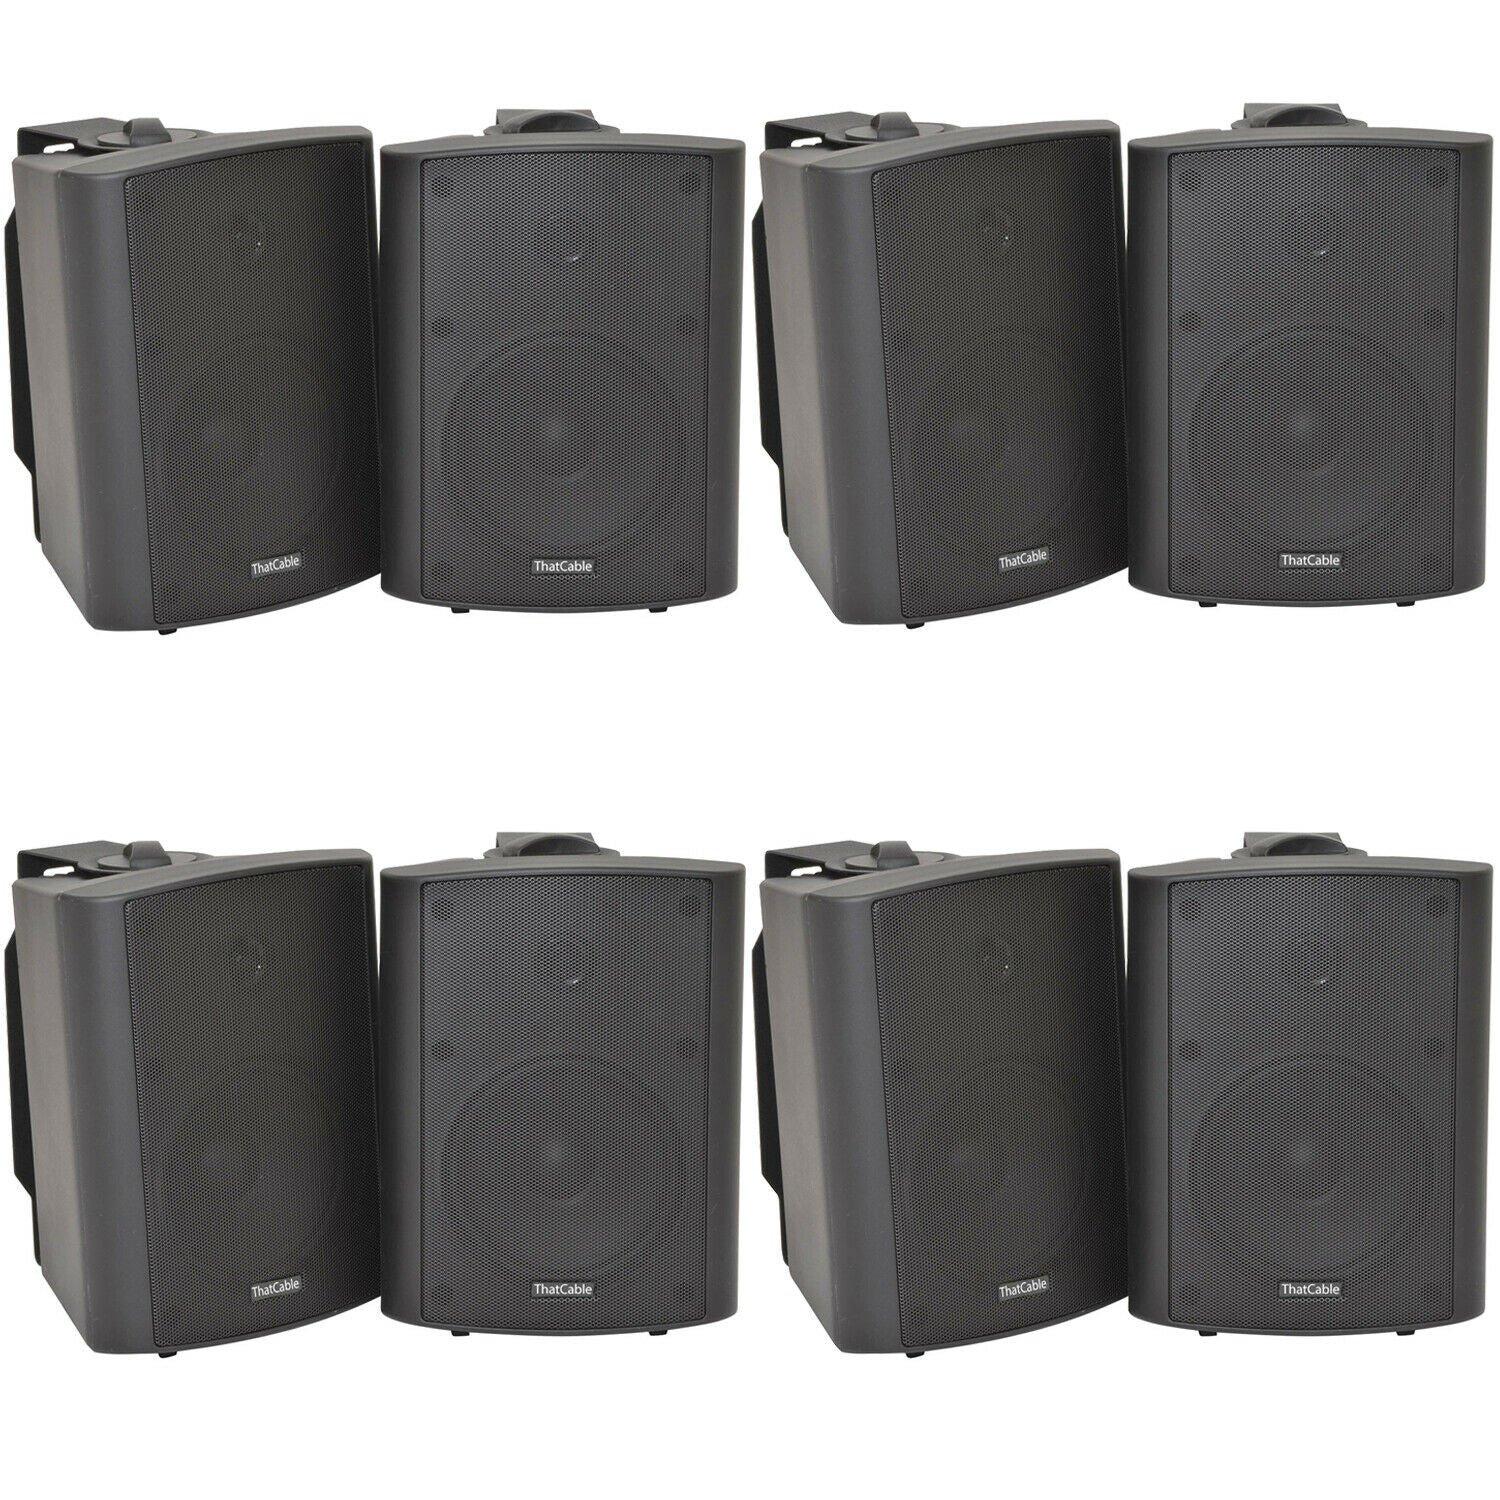 8x 90W Black Wall Mounted Stereo Speakers 5.25